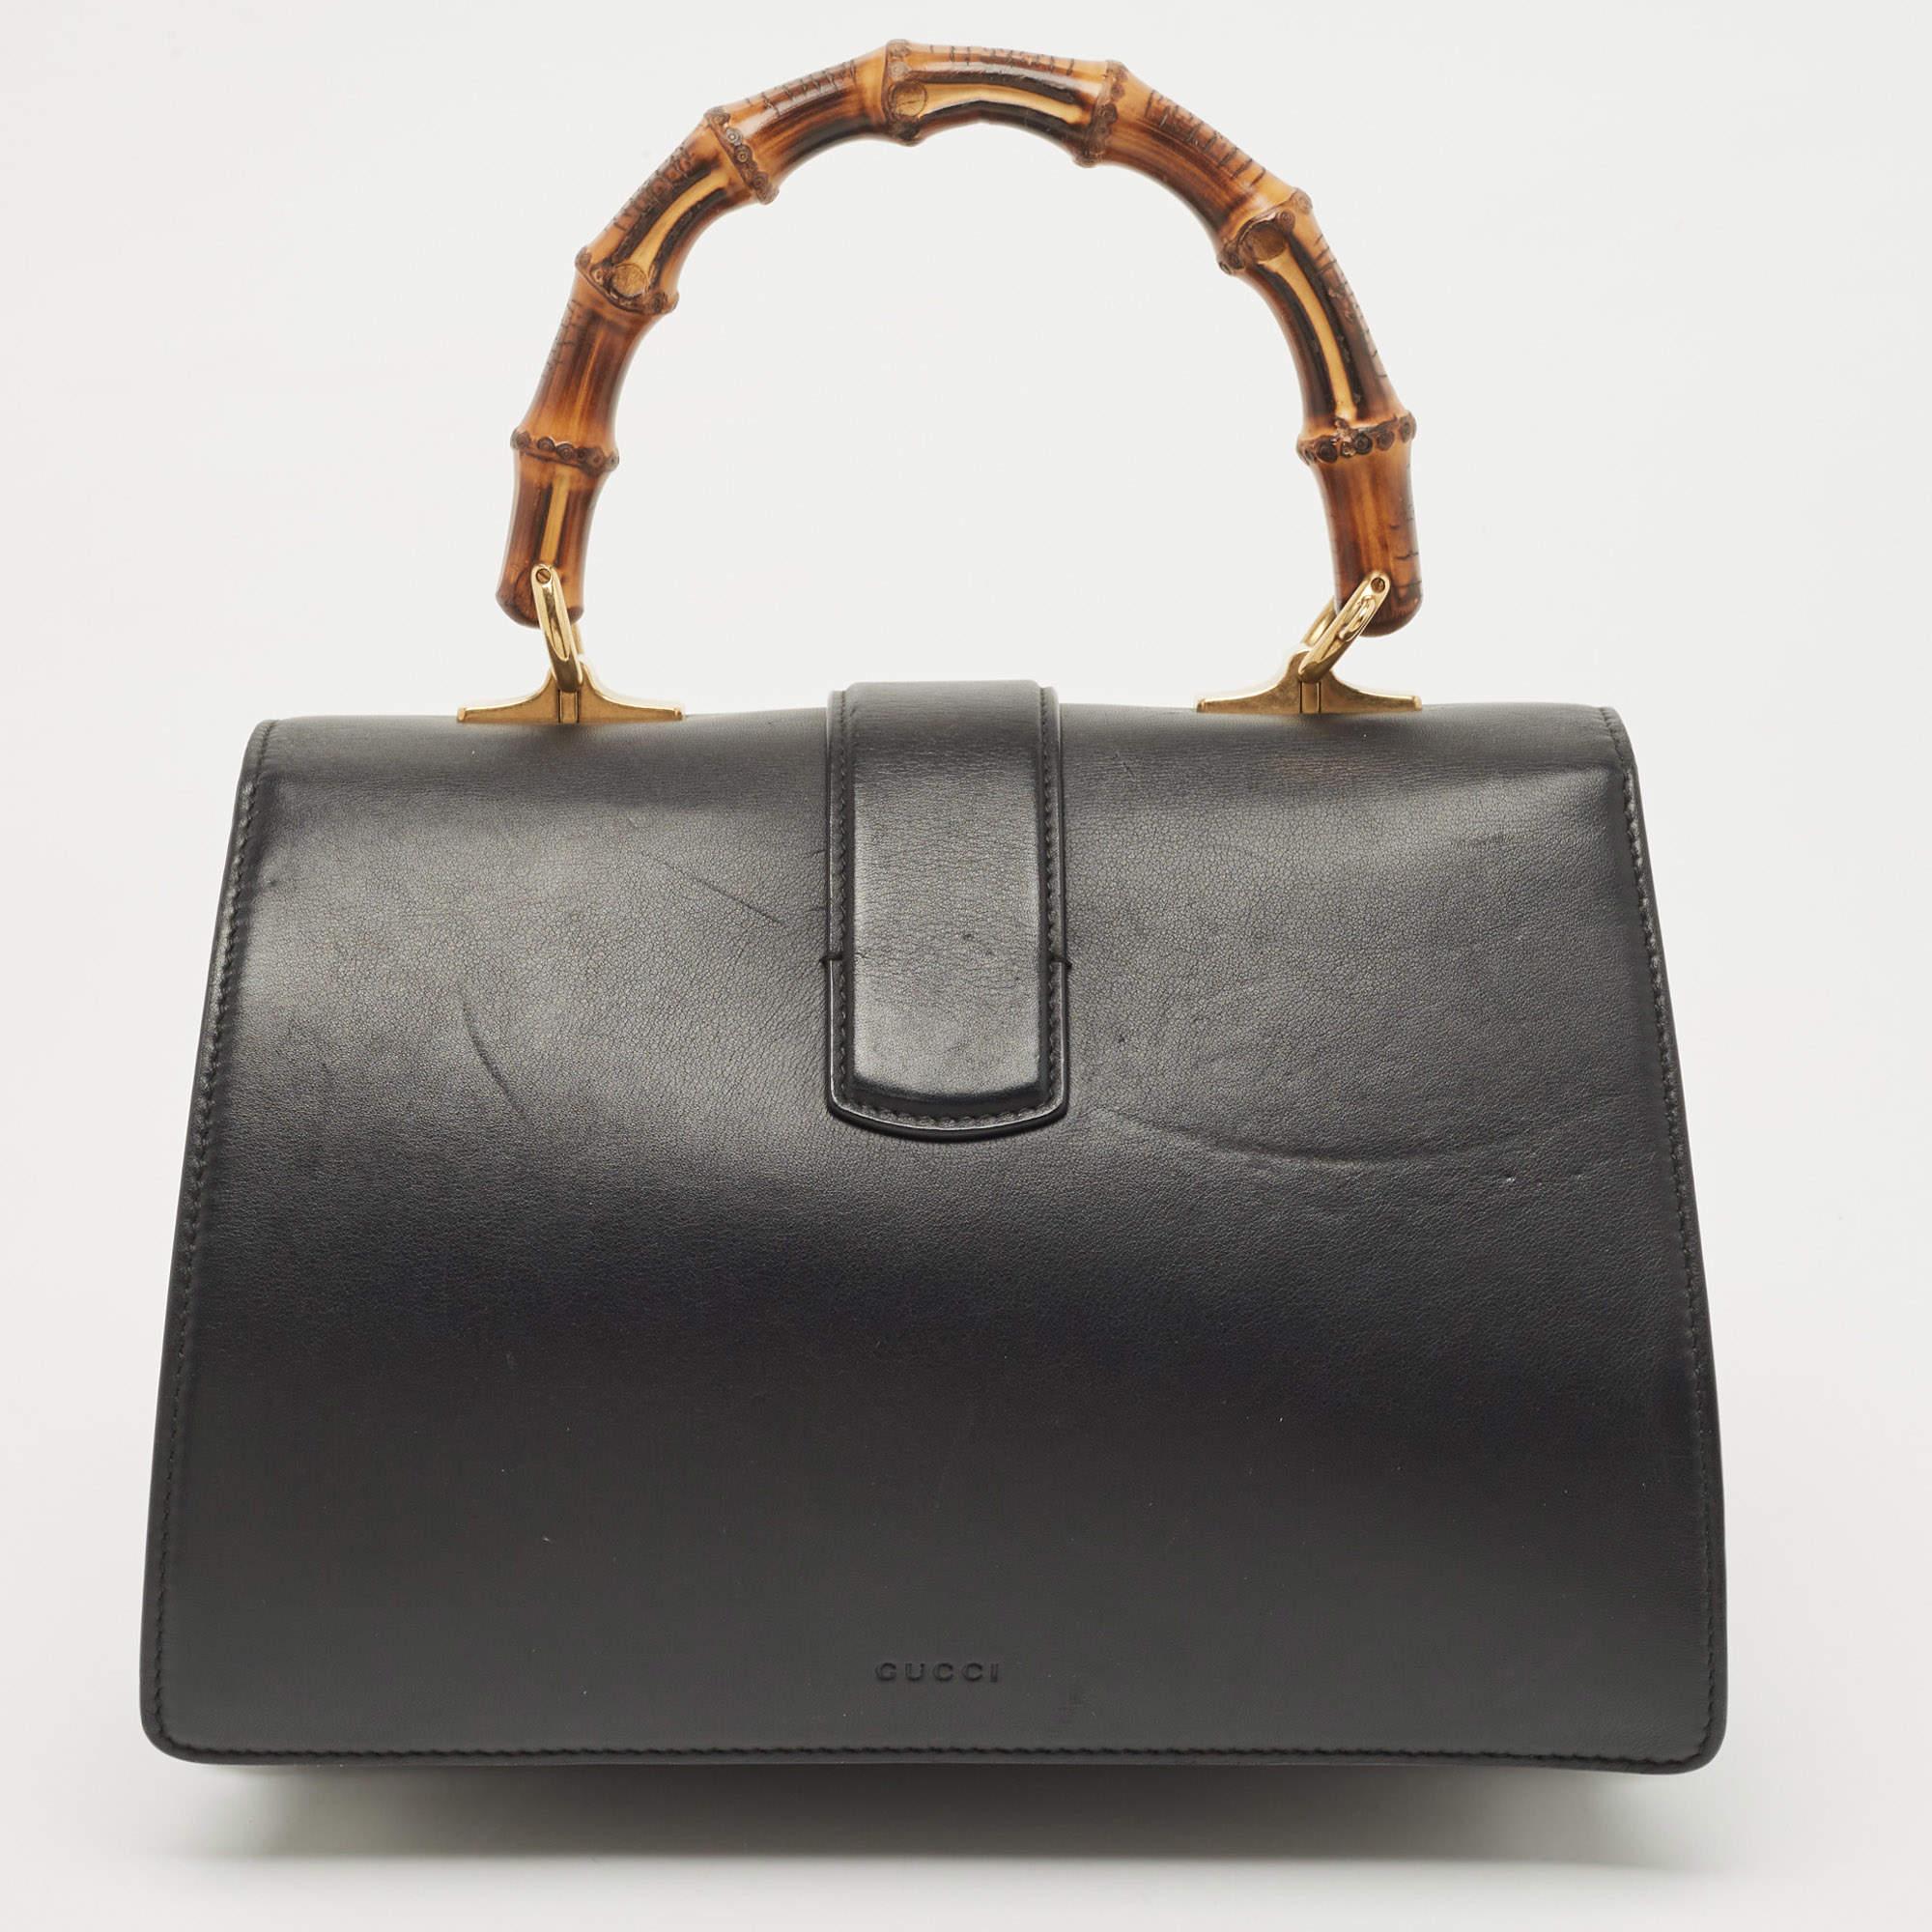 Ensure your day's essentials are in order and your outfit is complete with this Gucci bag. Crafted using the best materials, the bag carries the maison's signature of artful craftsmanship and enduring appeal.

Includes: Detachable Strap, Info Booklet